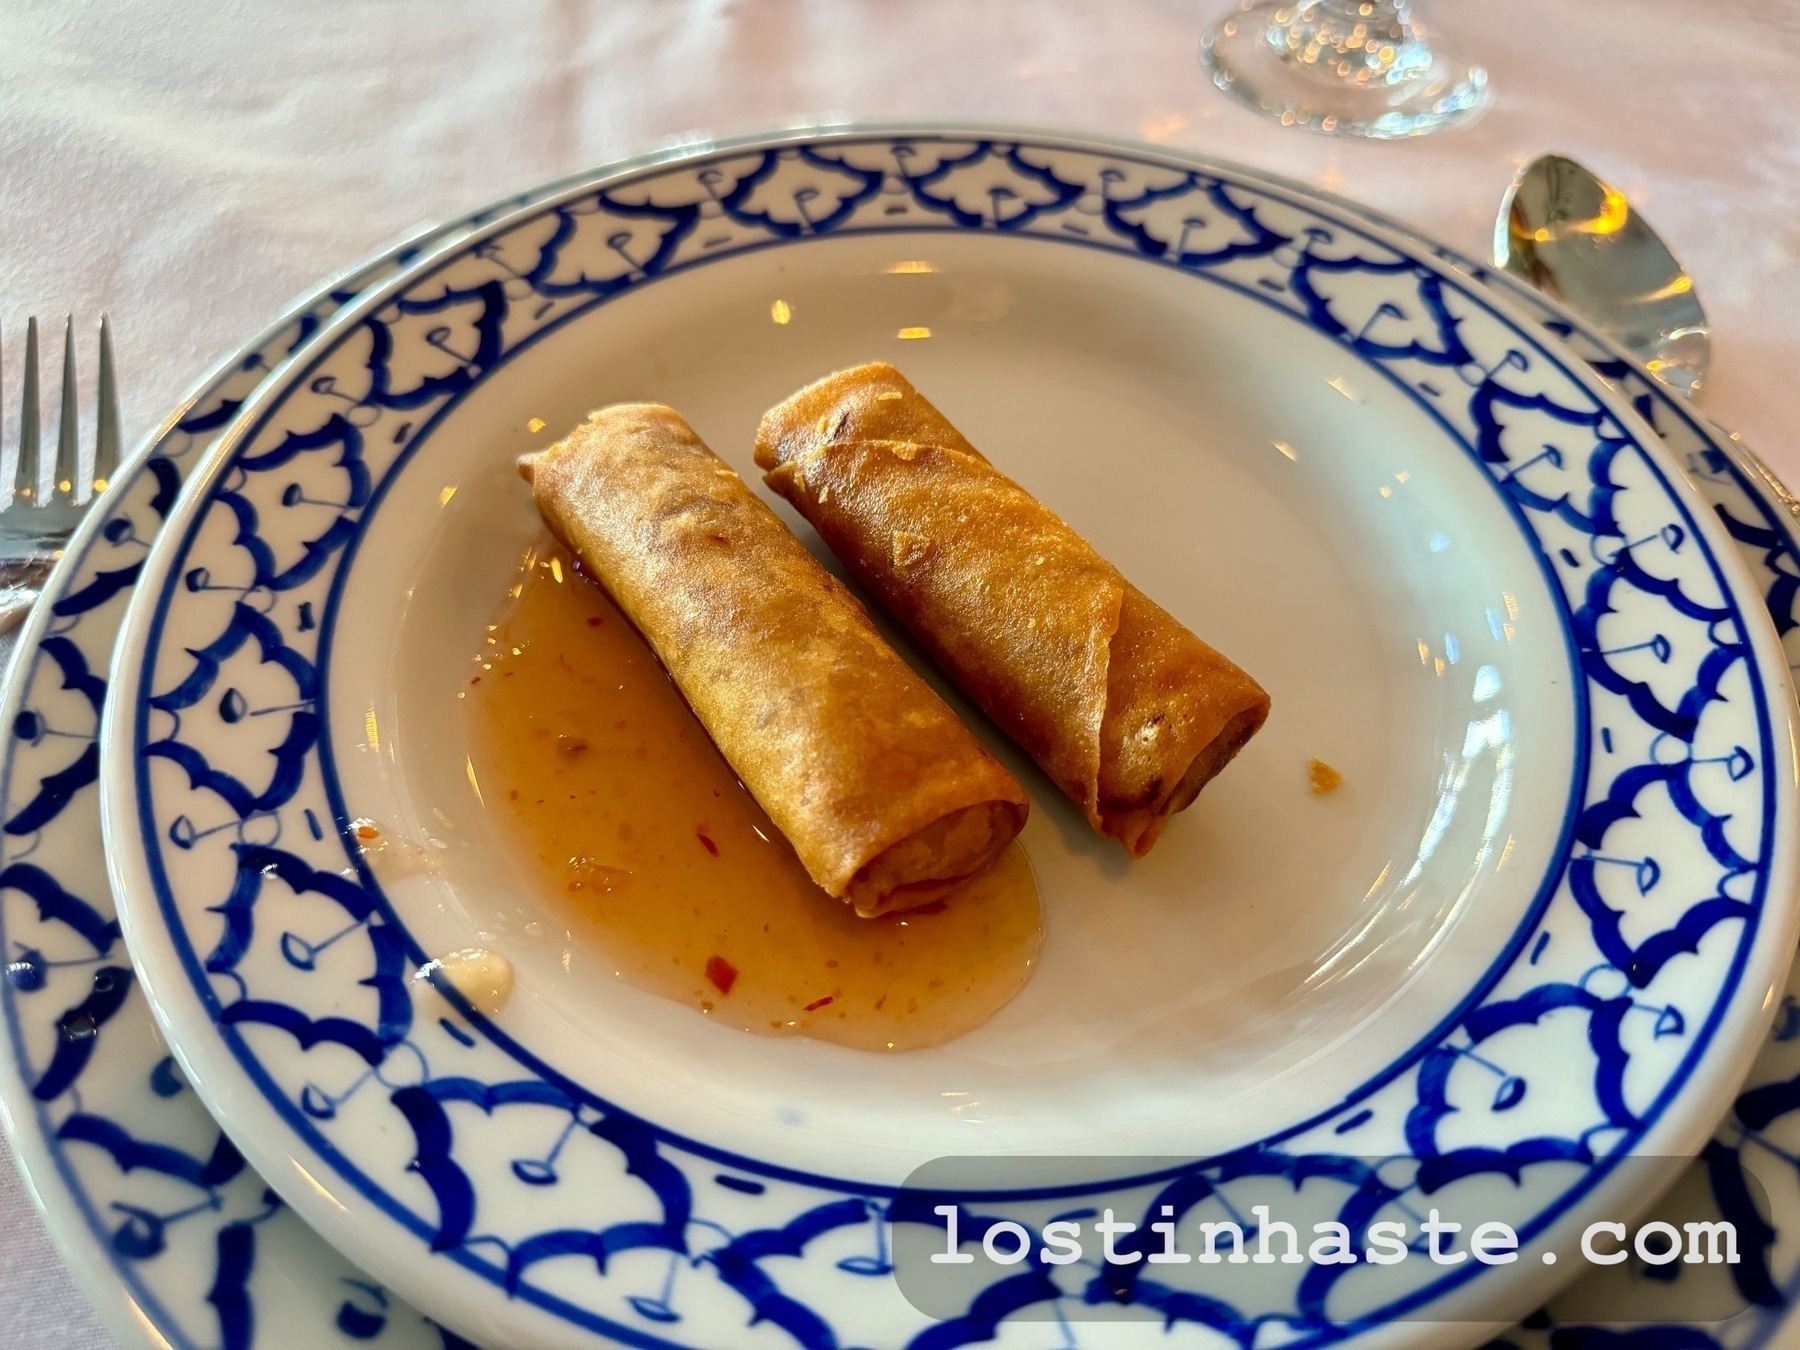 Two spring rolls sit on a detailed blue-and-white patterned plate with some dipping sauce, on a restaurant table.